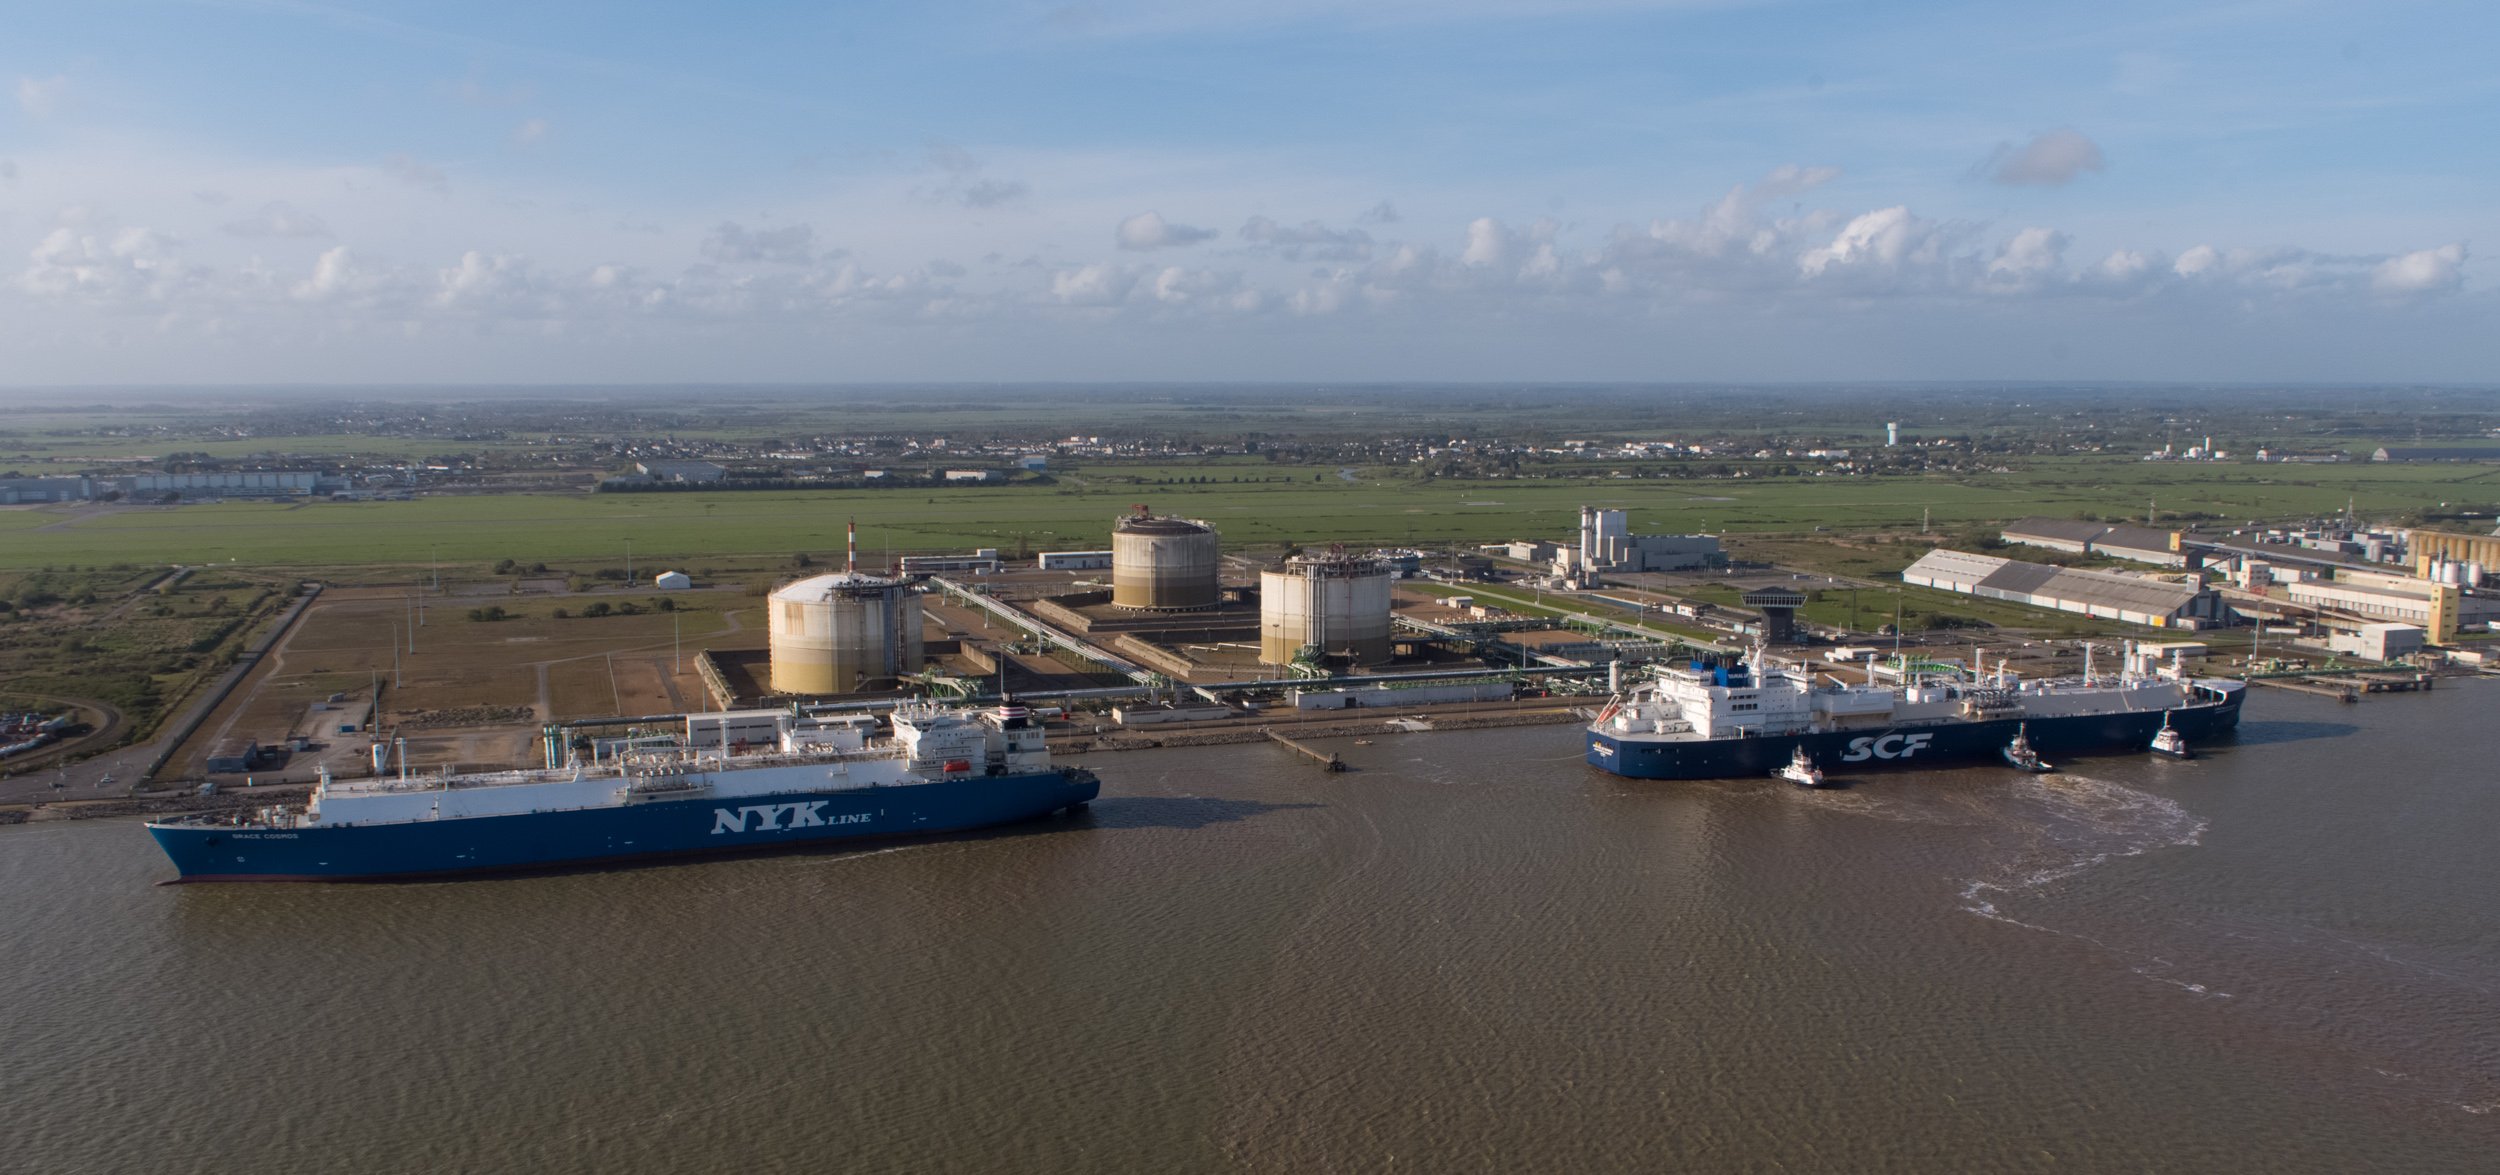 Elengy reports record LNG activities in 2018